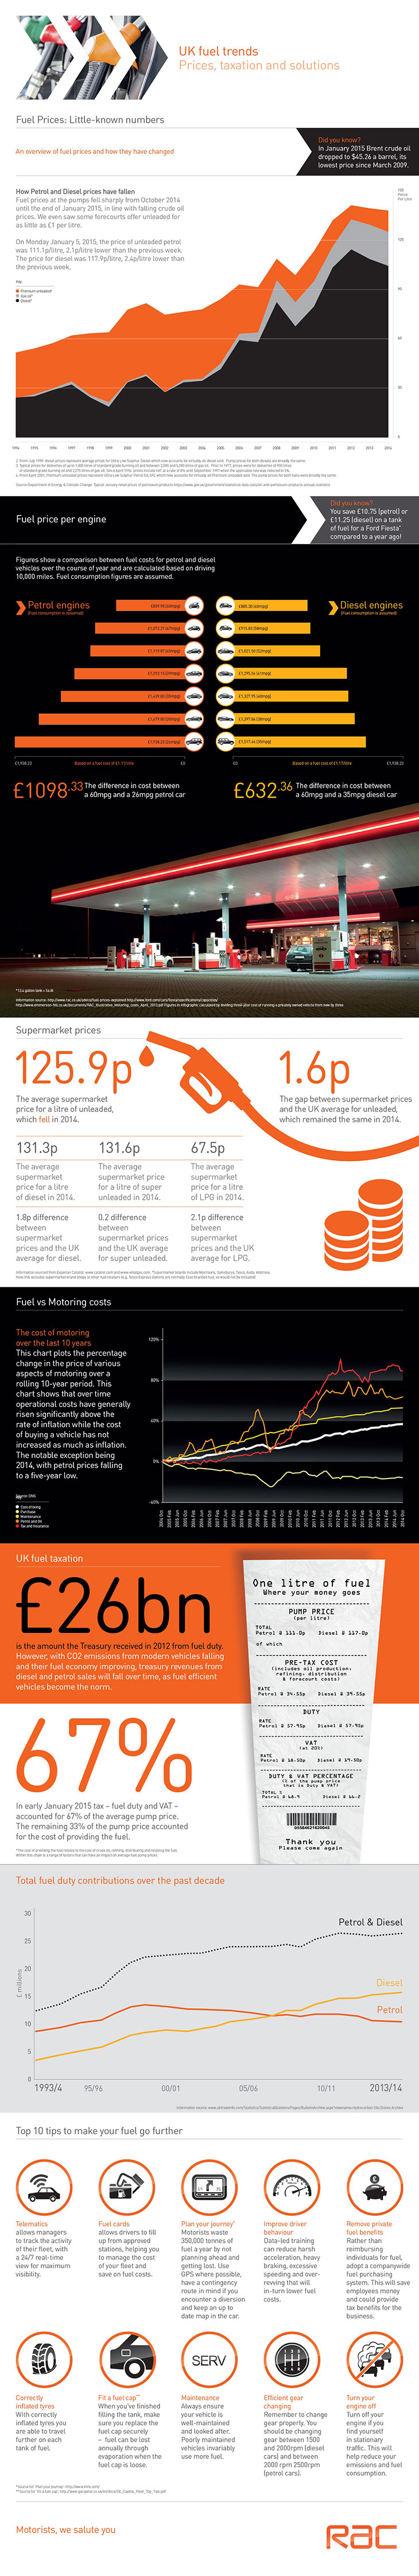 The RAC Fuel Card UK Fuel Trends Infographic